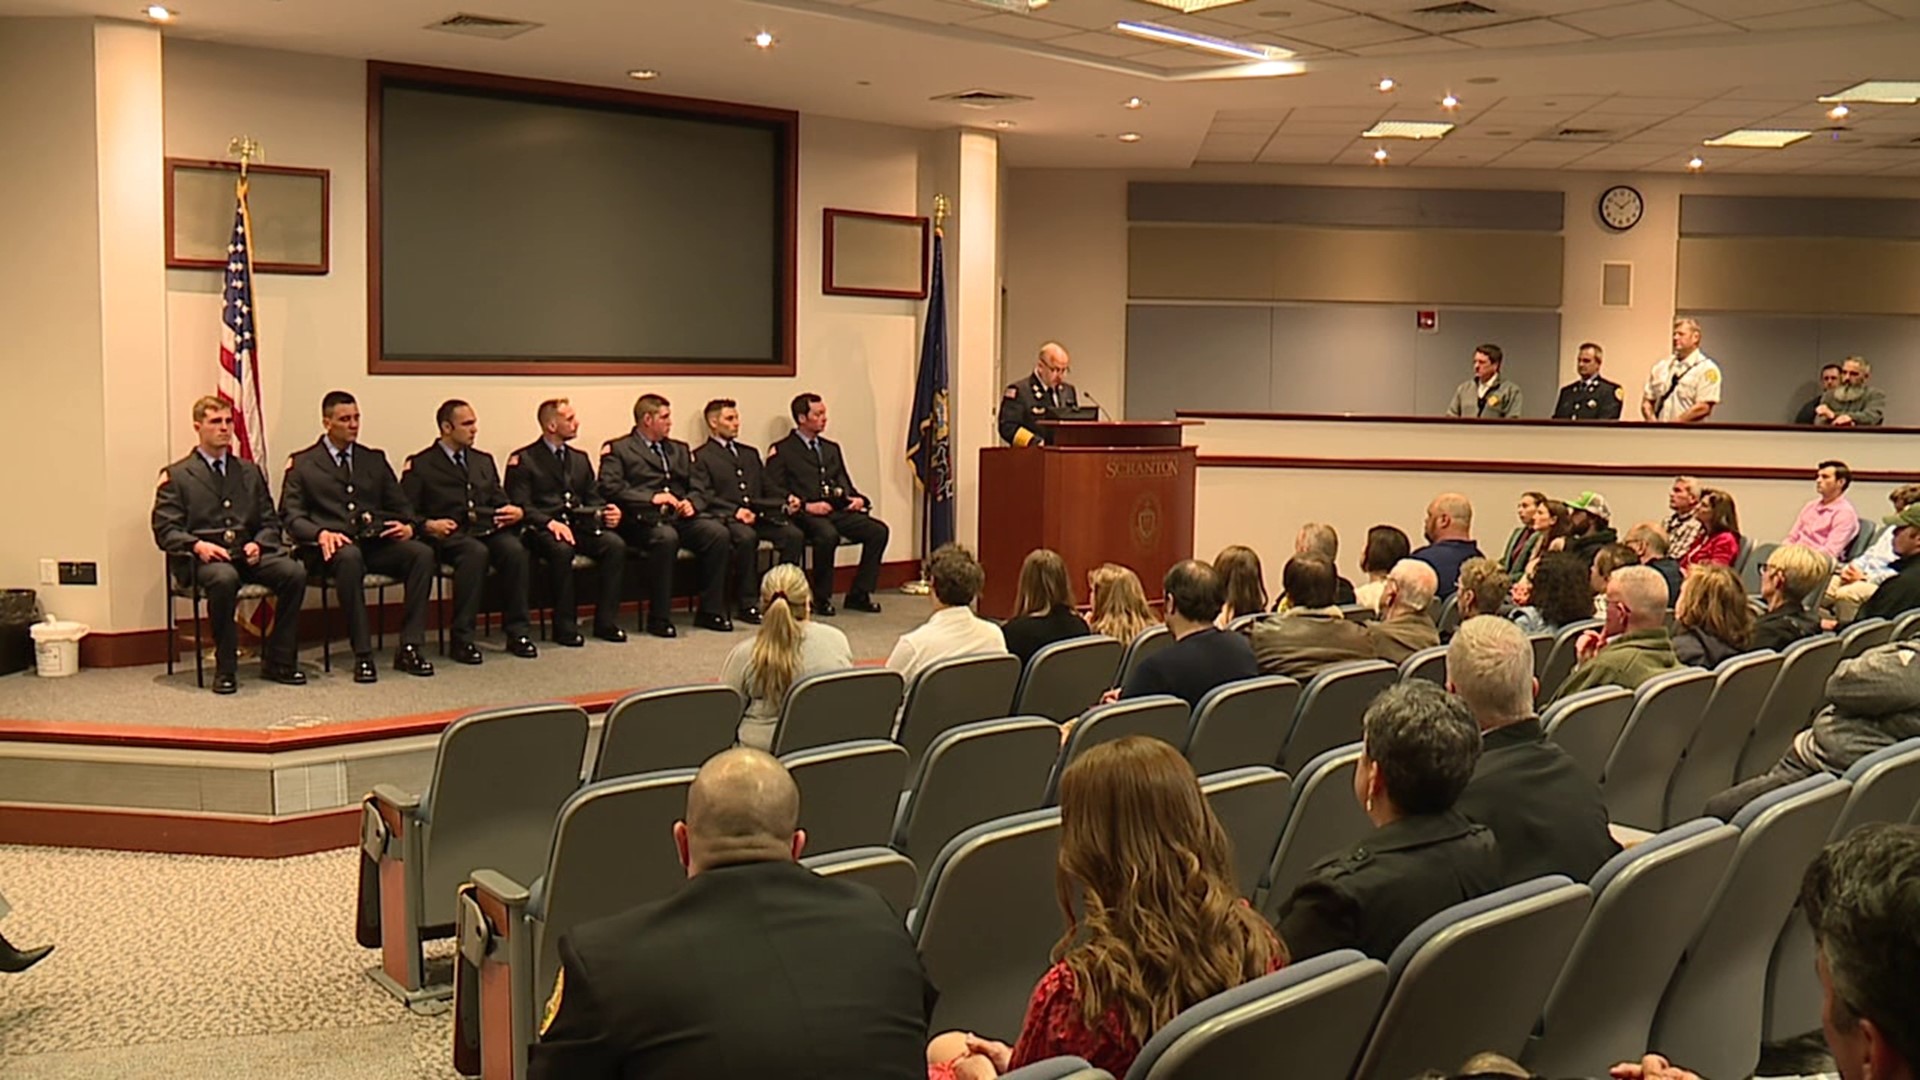 The Scranton fire department welcomed eight new members on Saturday.